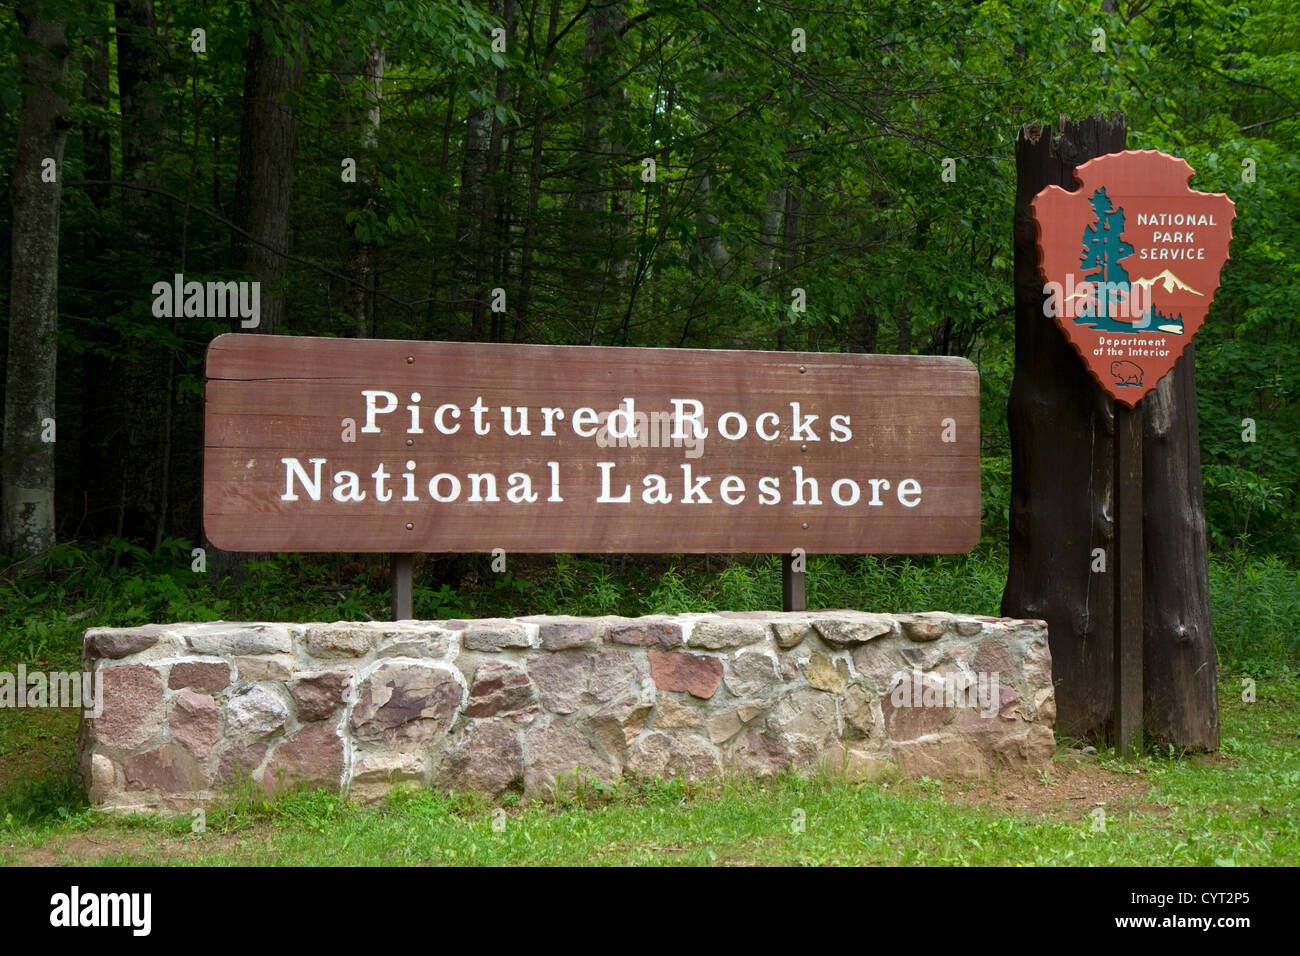 Pictured Rocks National Lakeshore park entrance located on the shore of Lake Superior in the Upper Peninsula of Michigan, USA. Stock Photo